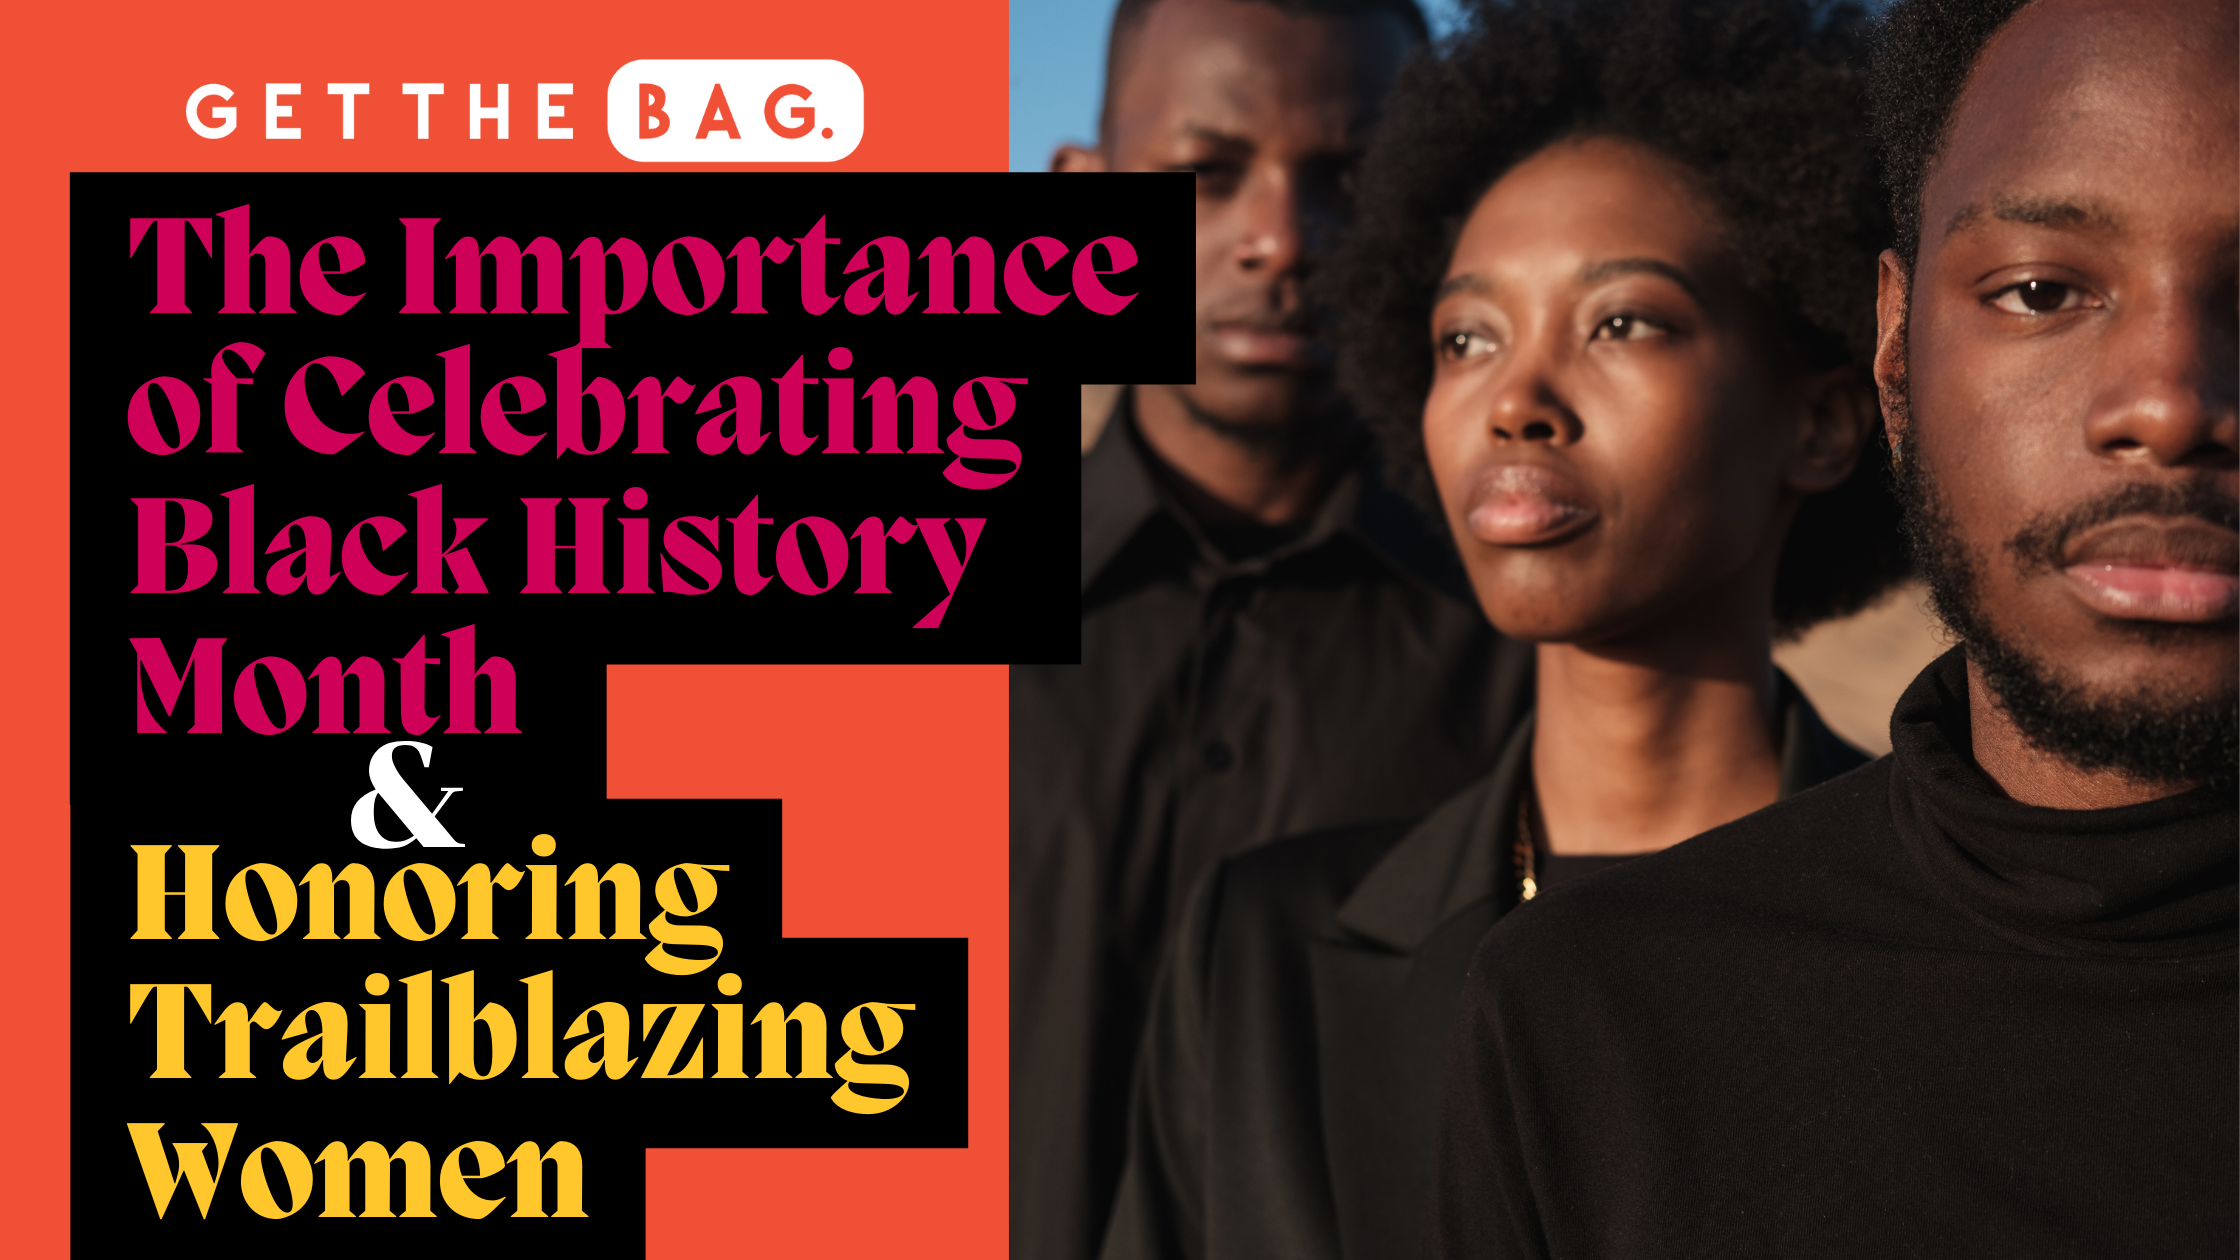 The Importance of Celebrating Black History Month and Honoring Trailblazing Women